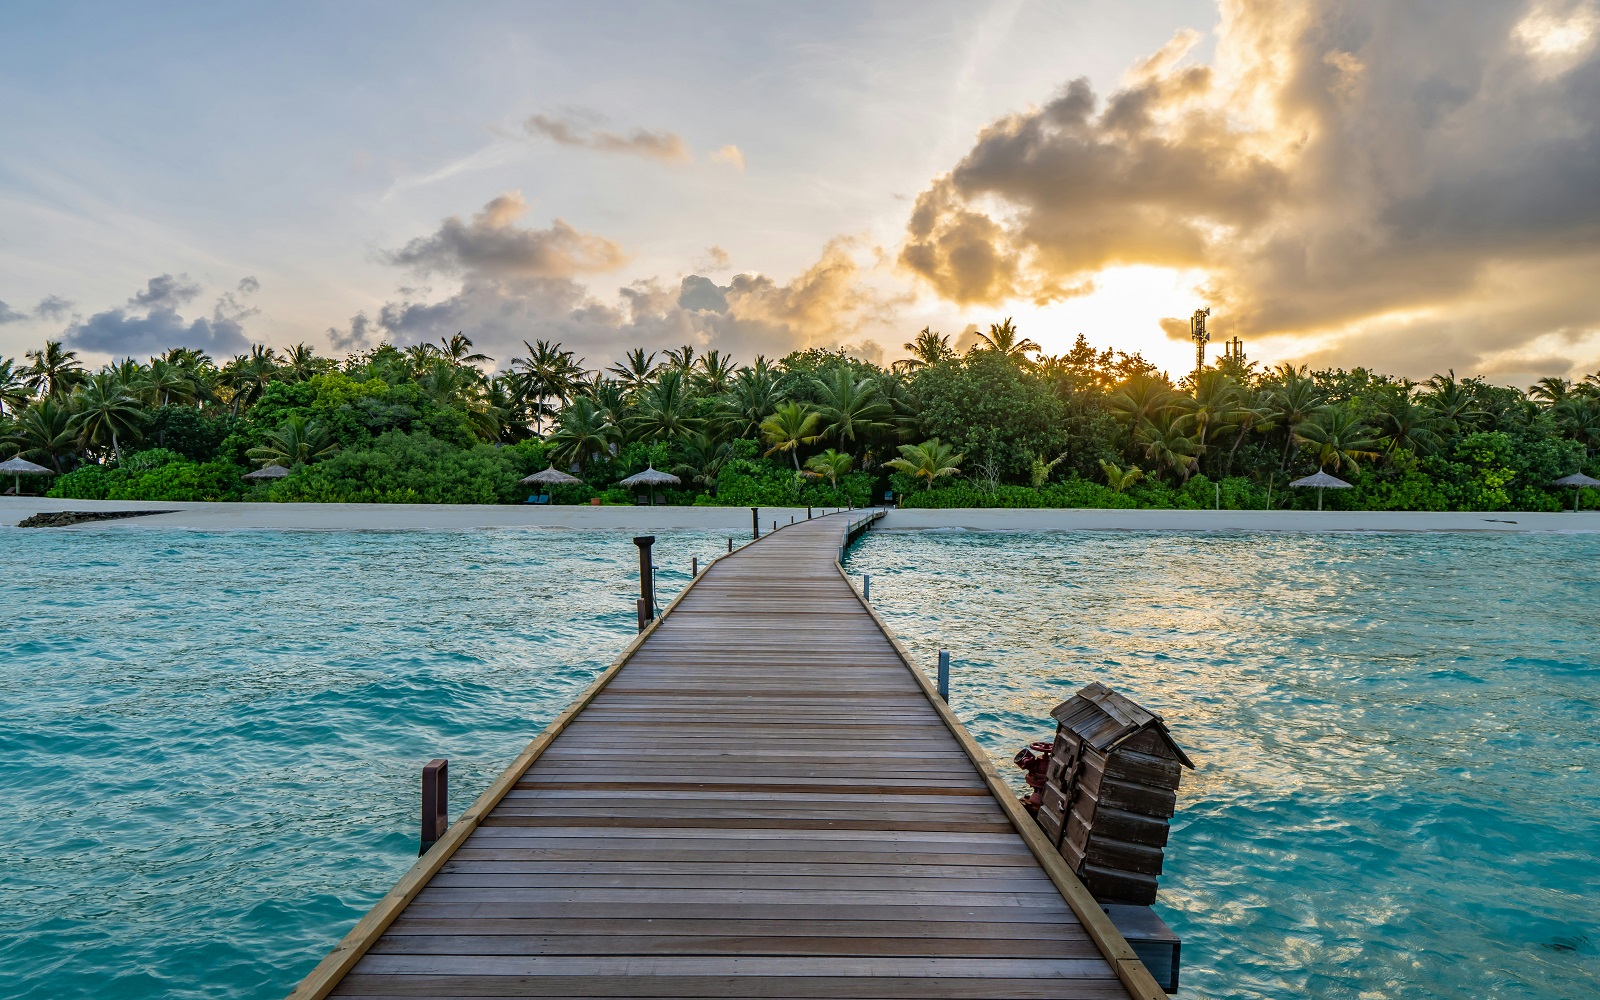 A wooden jetty leading to a tropical island in the Maldives